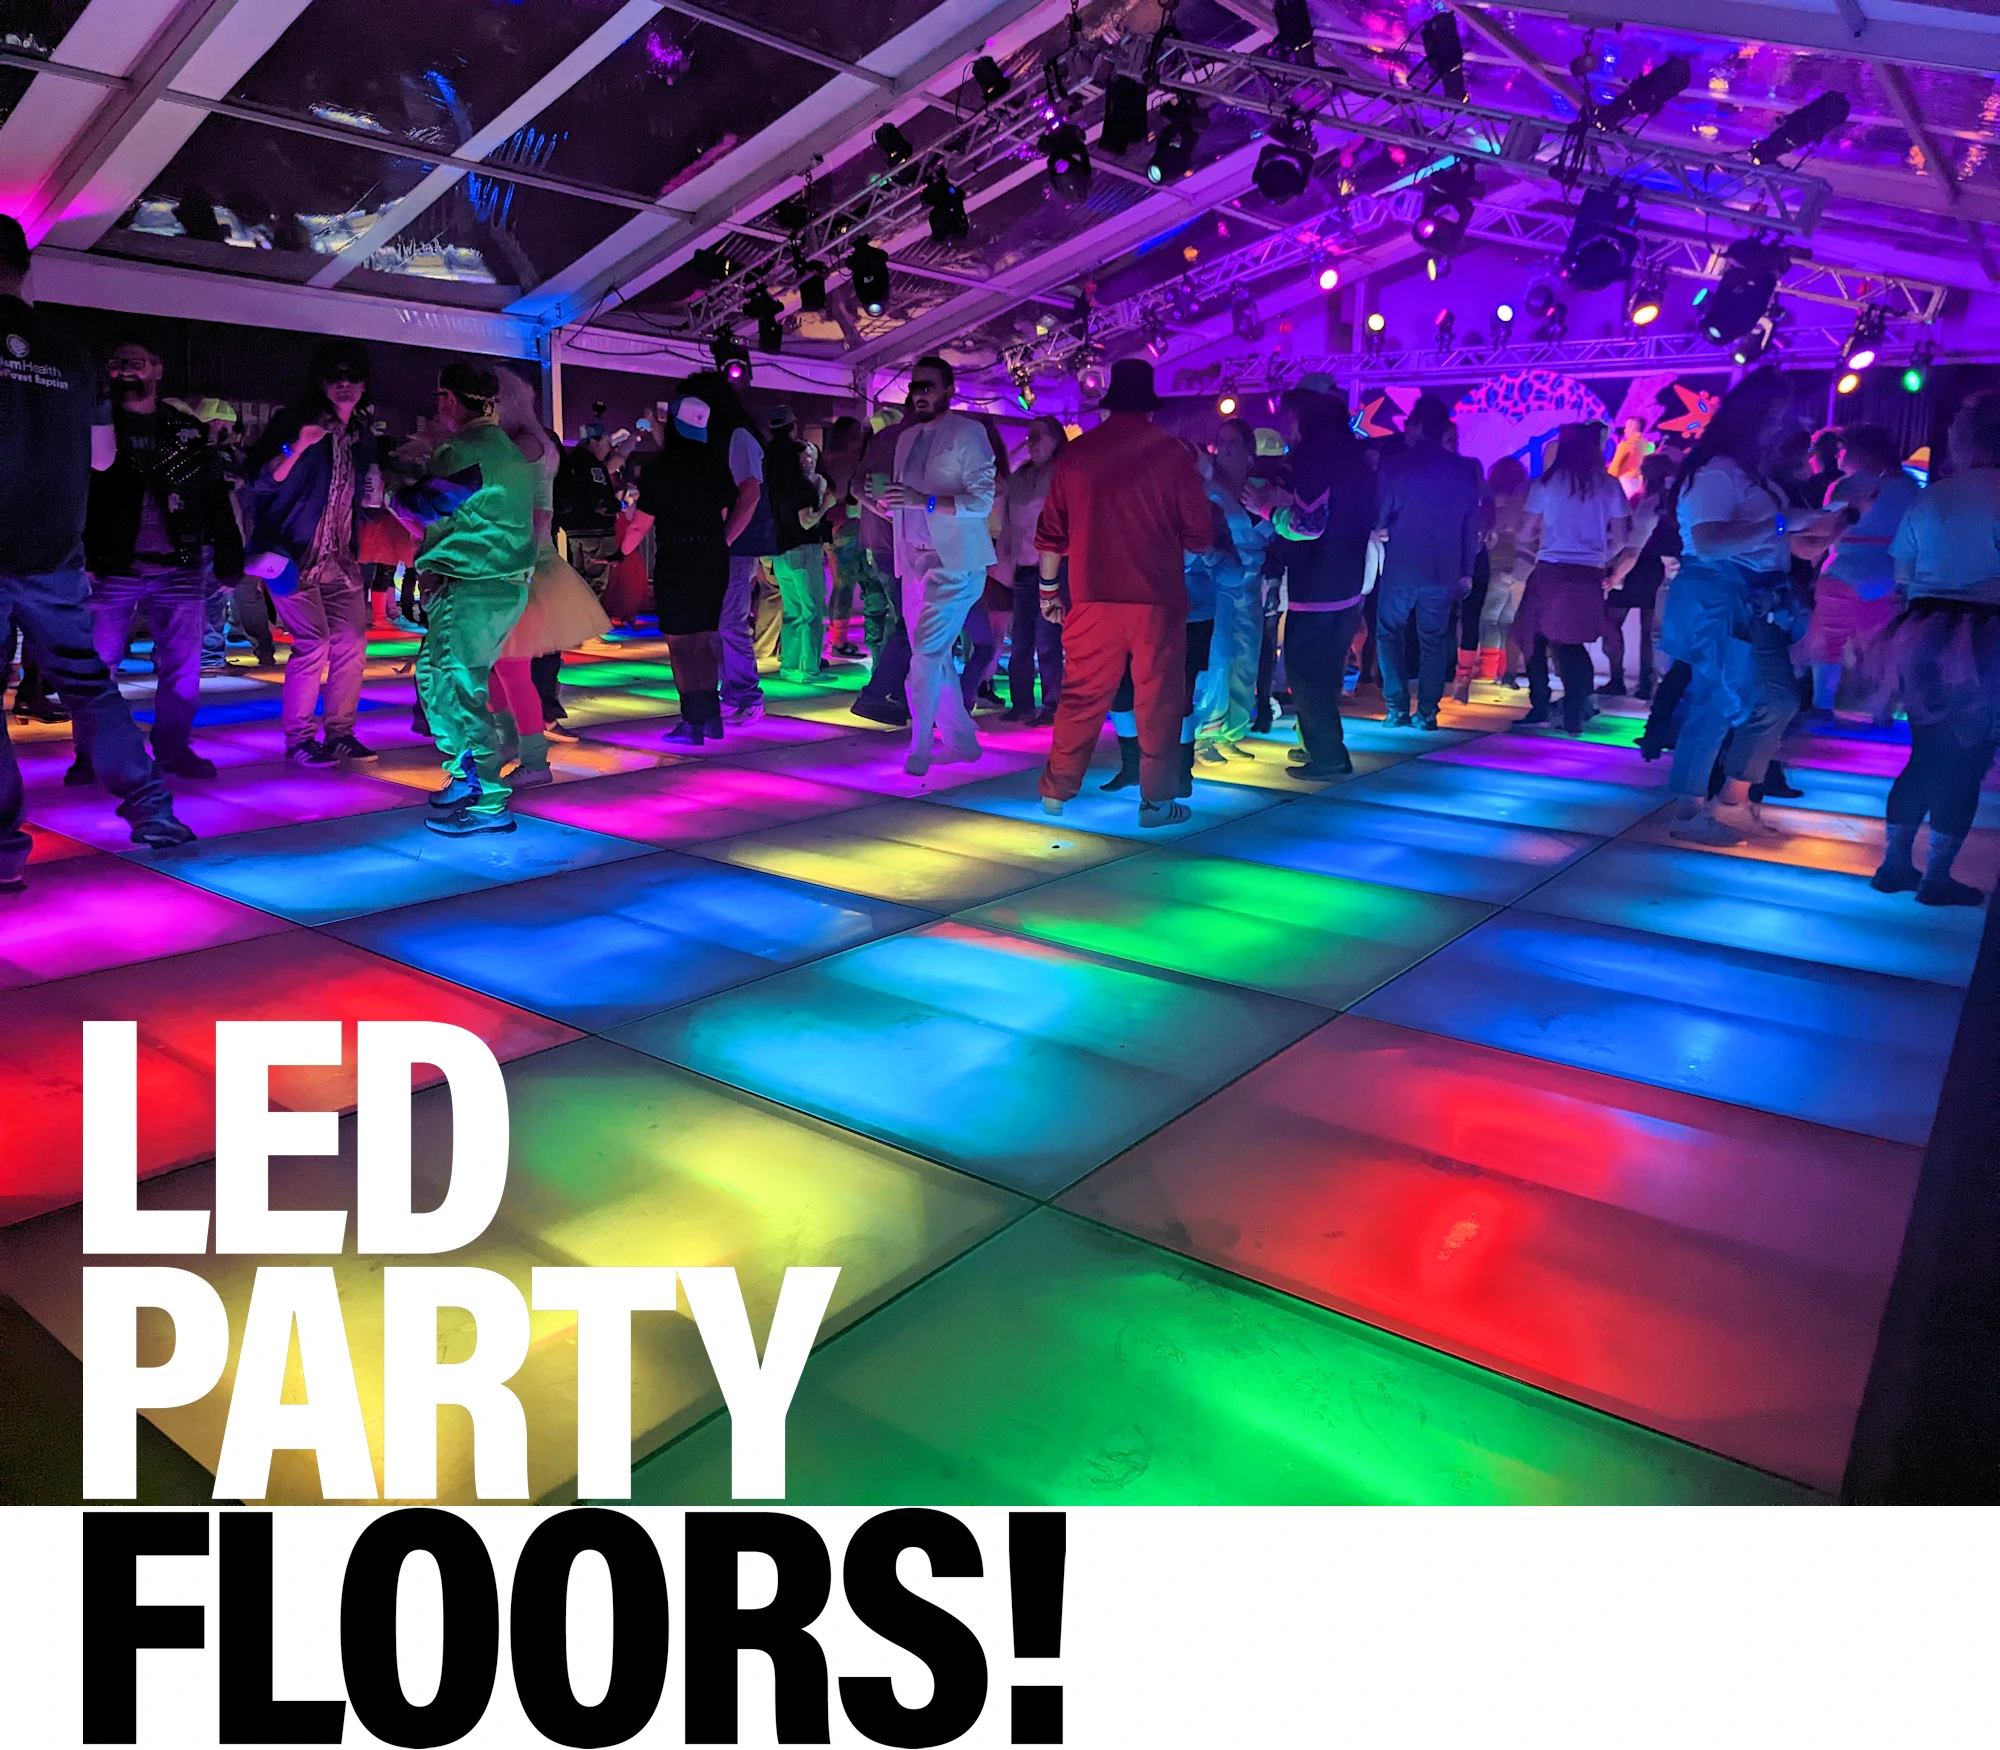 Raised platform, lighted dance floor in blue, green and yellow colors; with colored lights overhead.